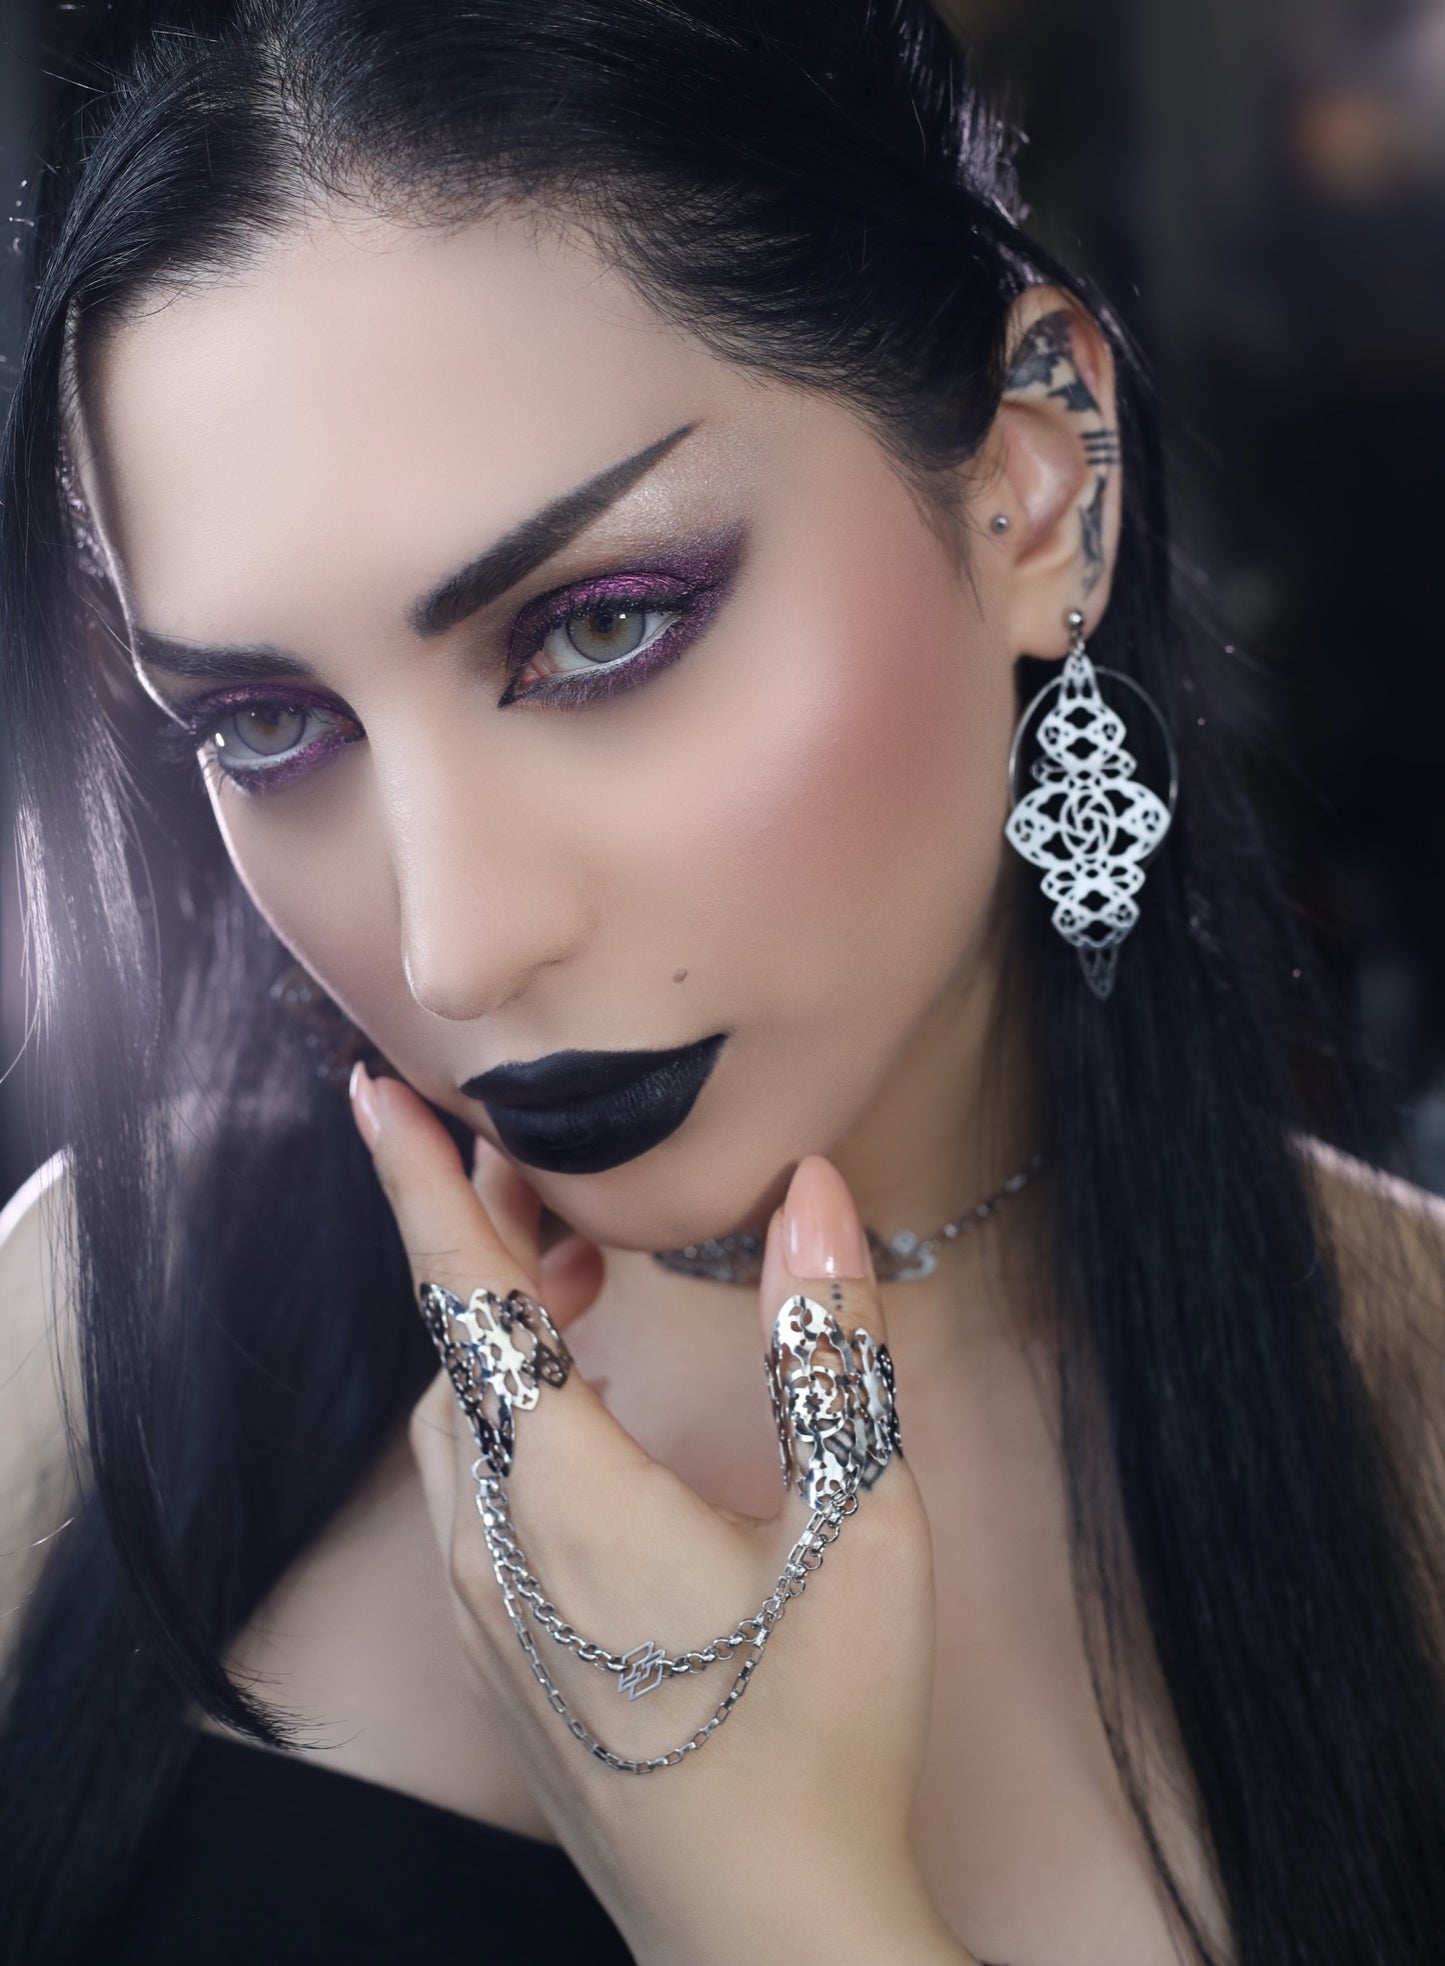 A striking gothic model with bold black lipstick and shimmering purple eye makeup showcases Myril Jewels' intricate accessories. She wears ornate white filigree earrings and matching rings connected by a delicate chain, exemplifying the dark-avantgarde aesthetic. Ideal for those embracing neo-gothic style or looking for bold witchcore accessories.